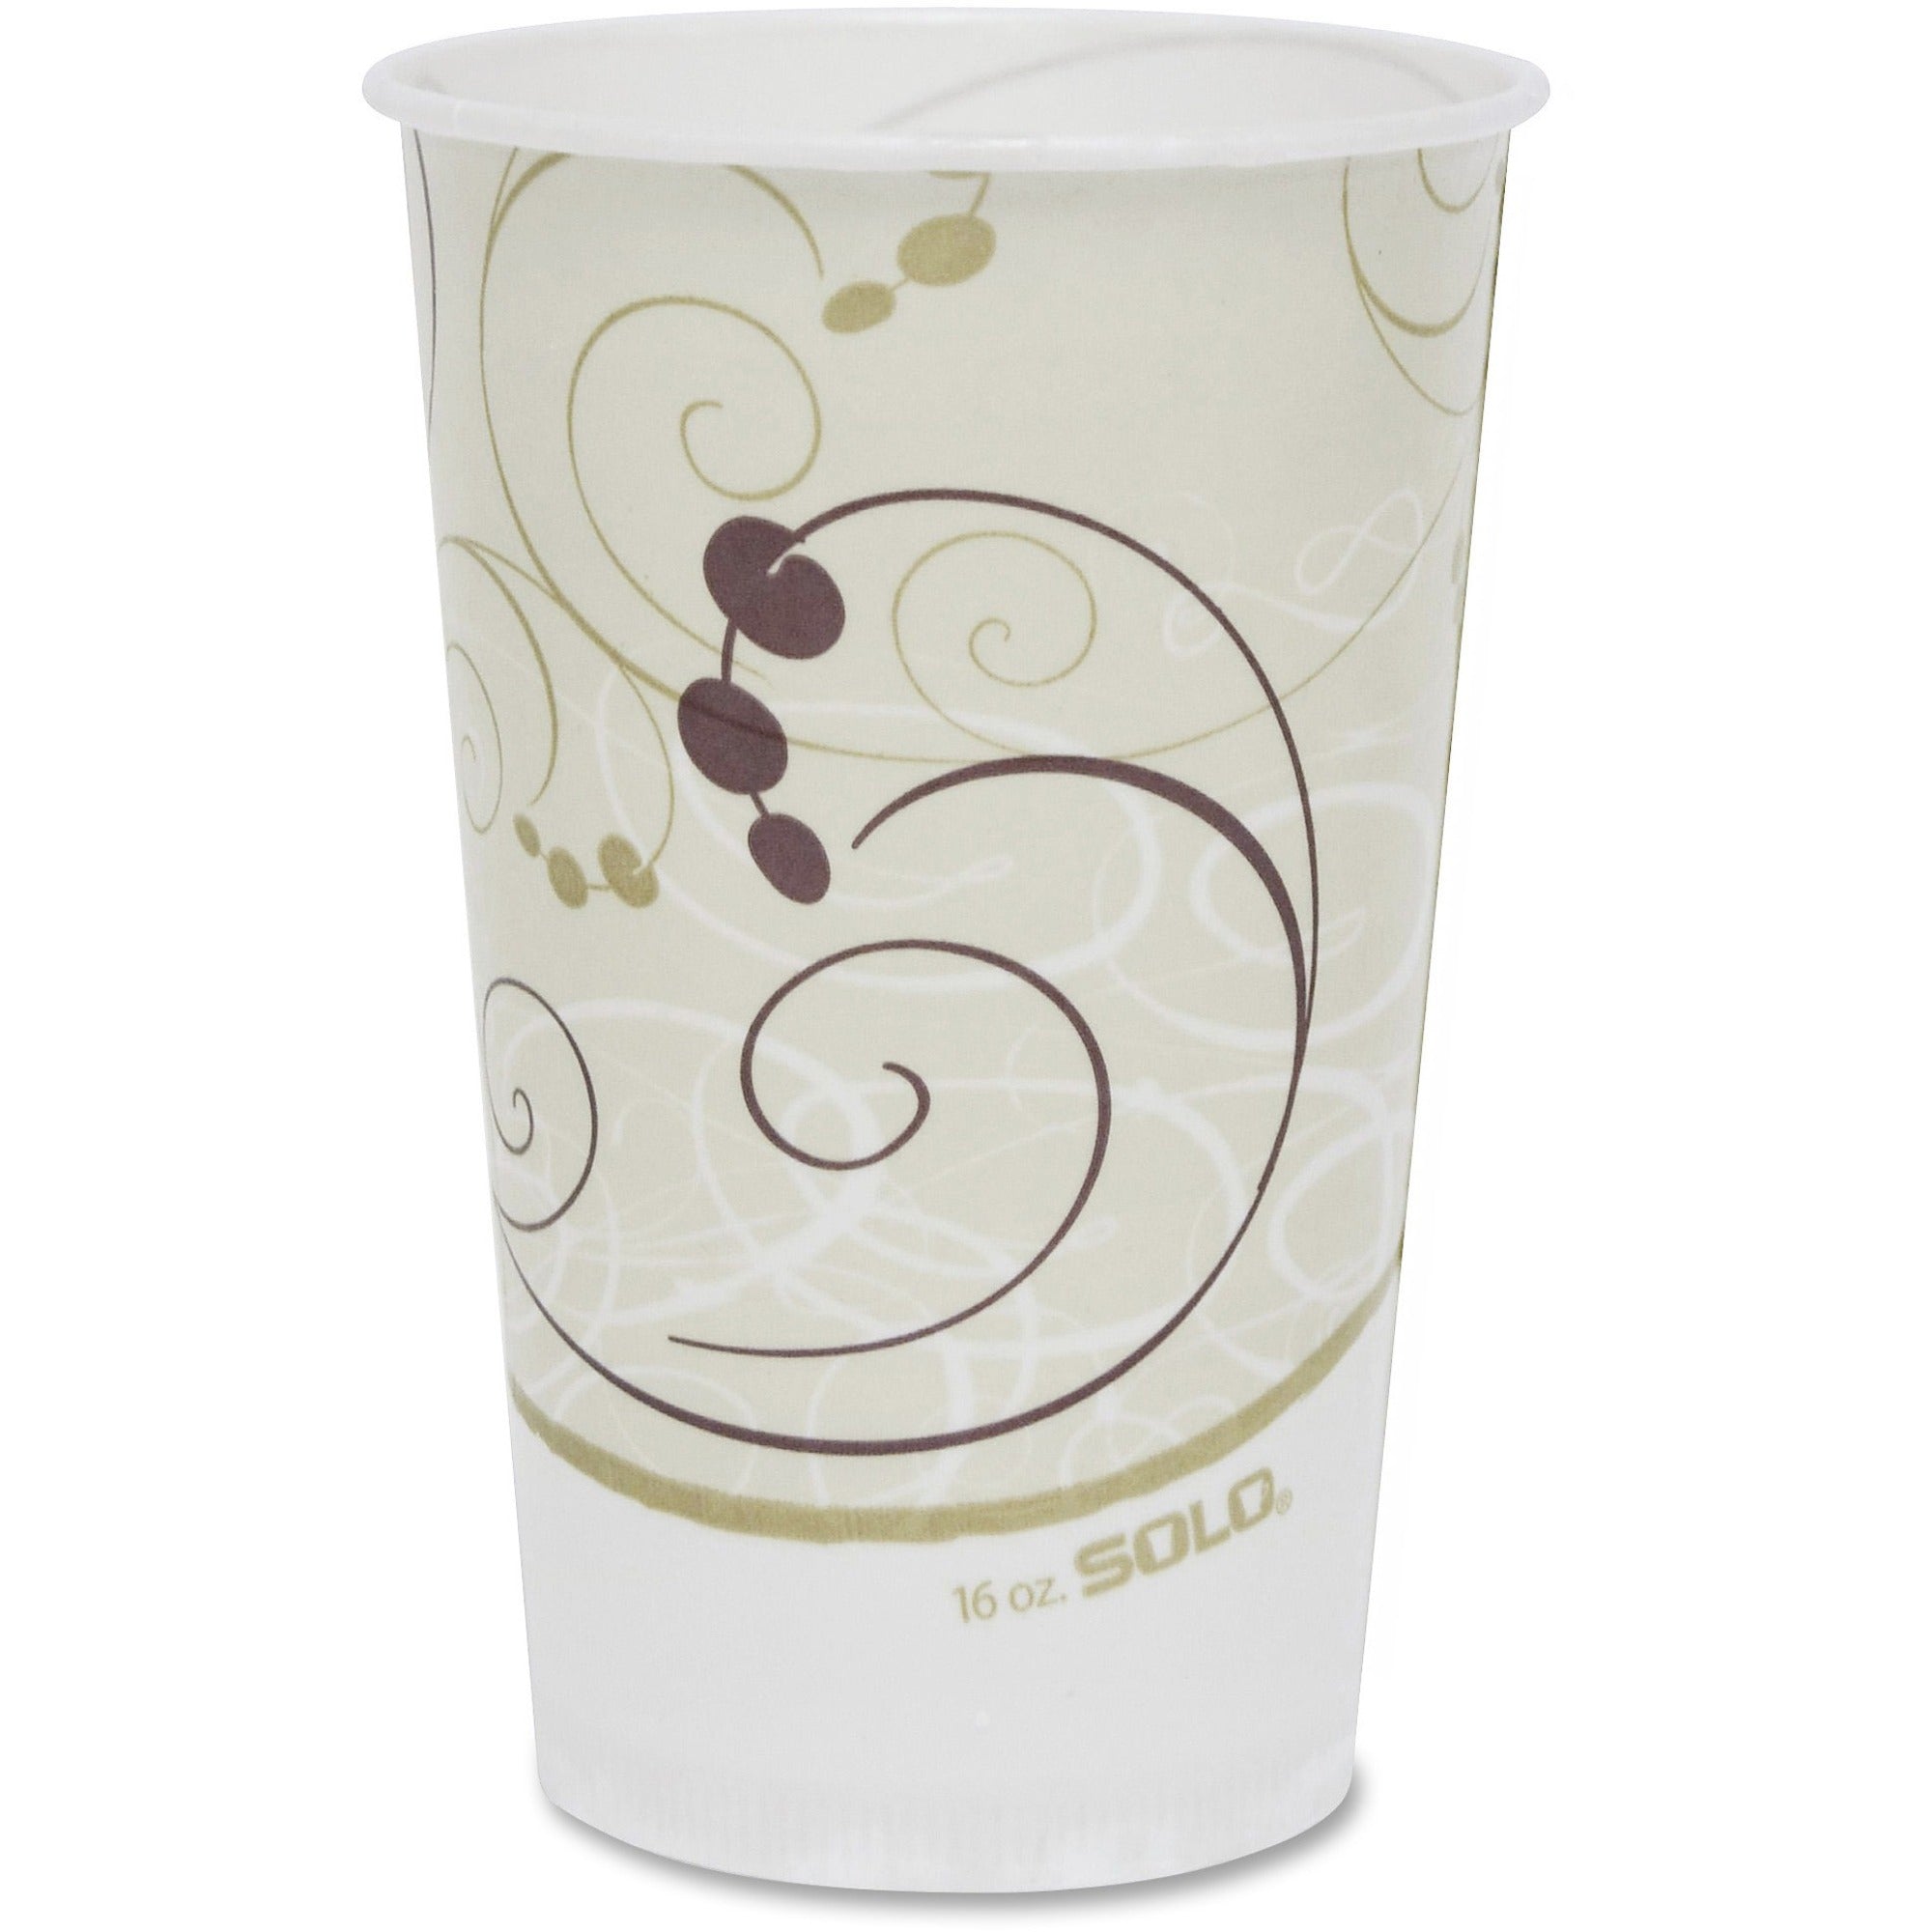 Solo 16 oz Symphony Waxed Paper Cold Cups - 50 / Pack - 20 / Carton - White, Brown, Green - Paper - Cold Drink, Milk Shake, Smoothie